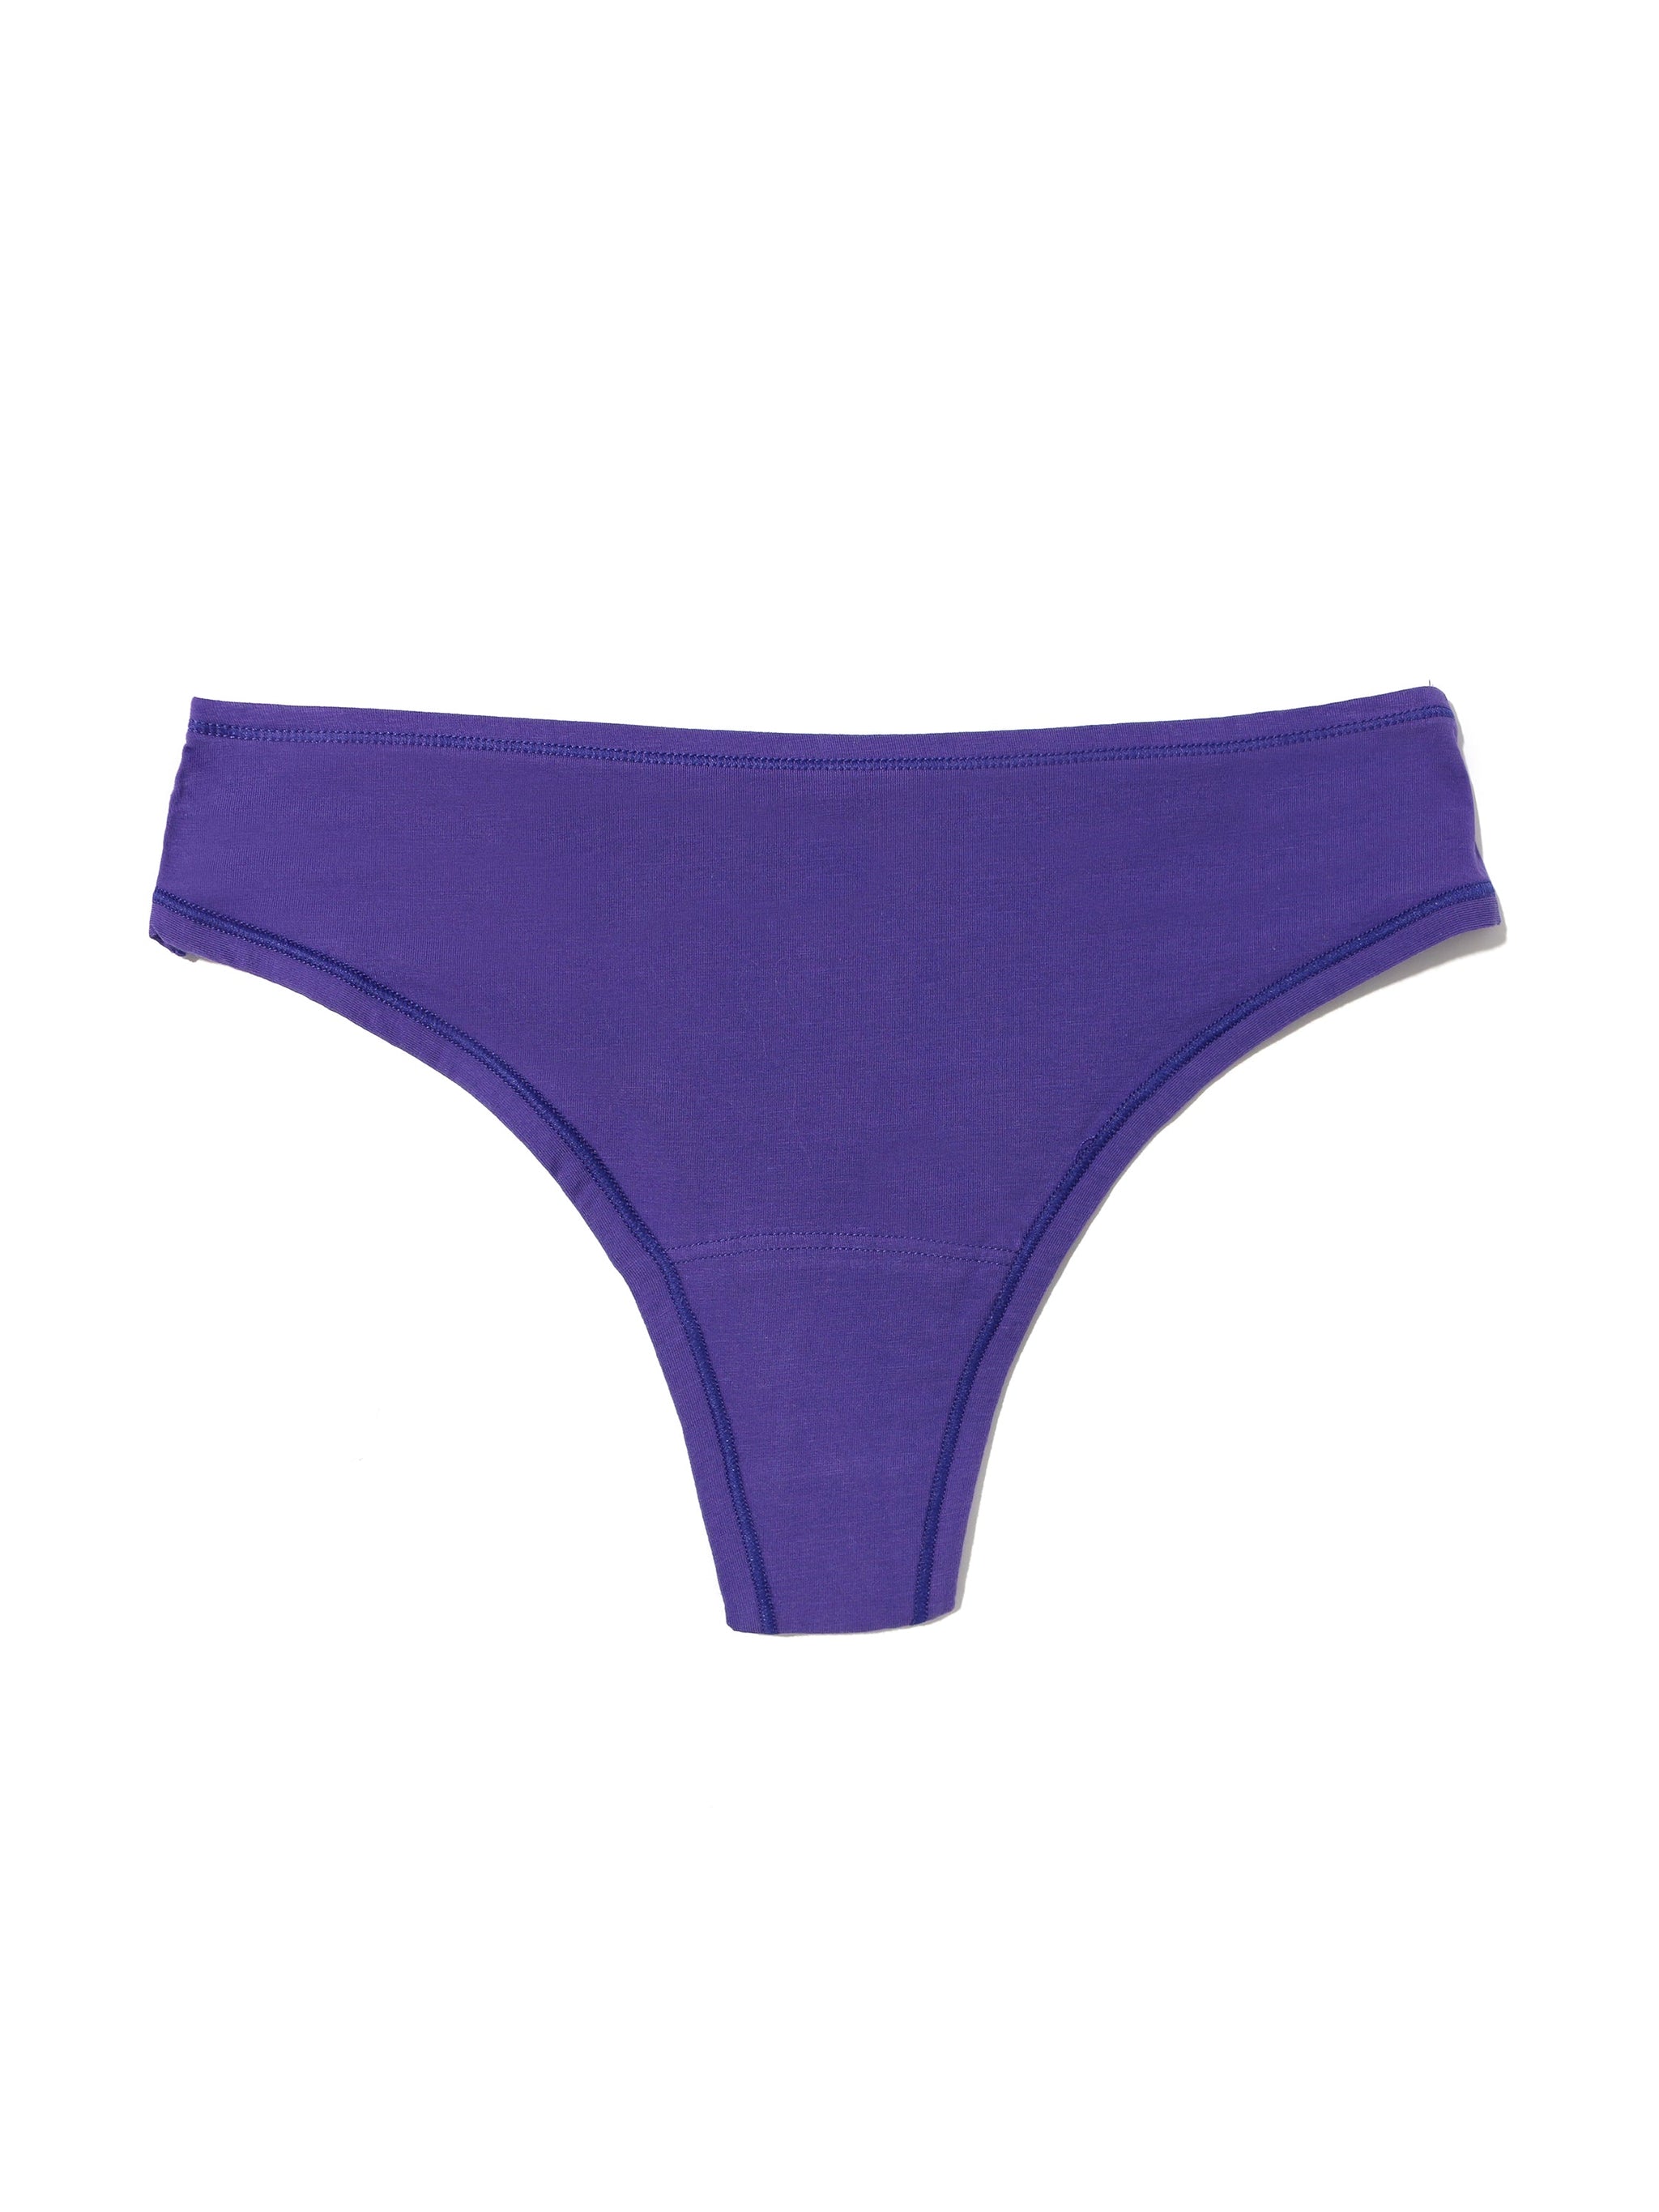 Thongs 3 for $48, Mix & Match Underwear